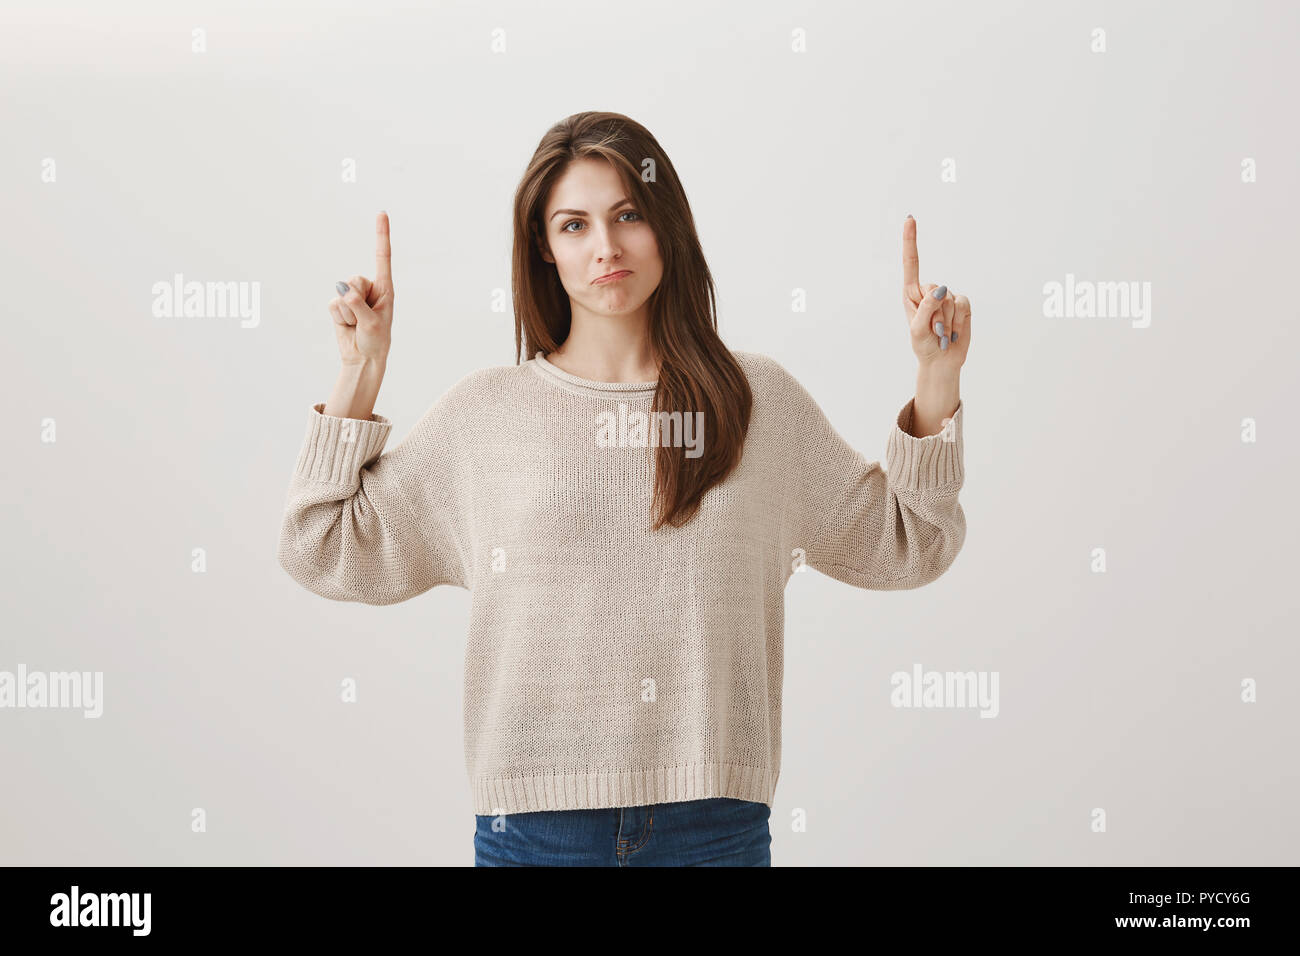 It could be worse. Portrait of gloomy bothered slender female in casual outfit pointing up with raised index fingers, making sad smile and gazing at camera, losing or upsetting cause of bad weather Stock Photo